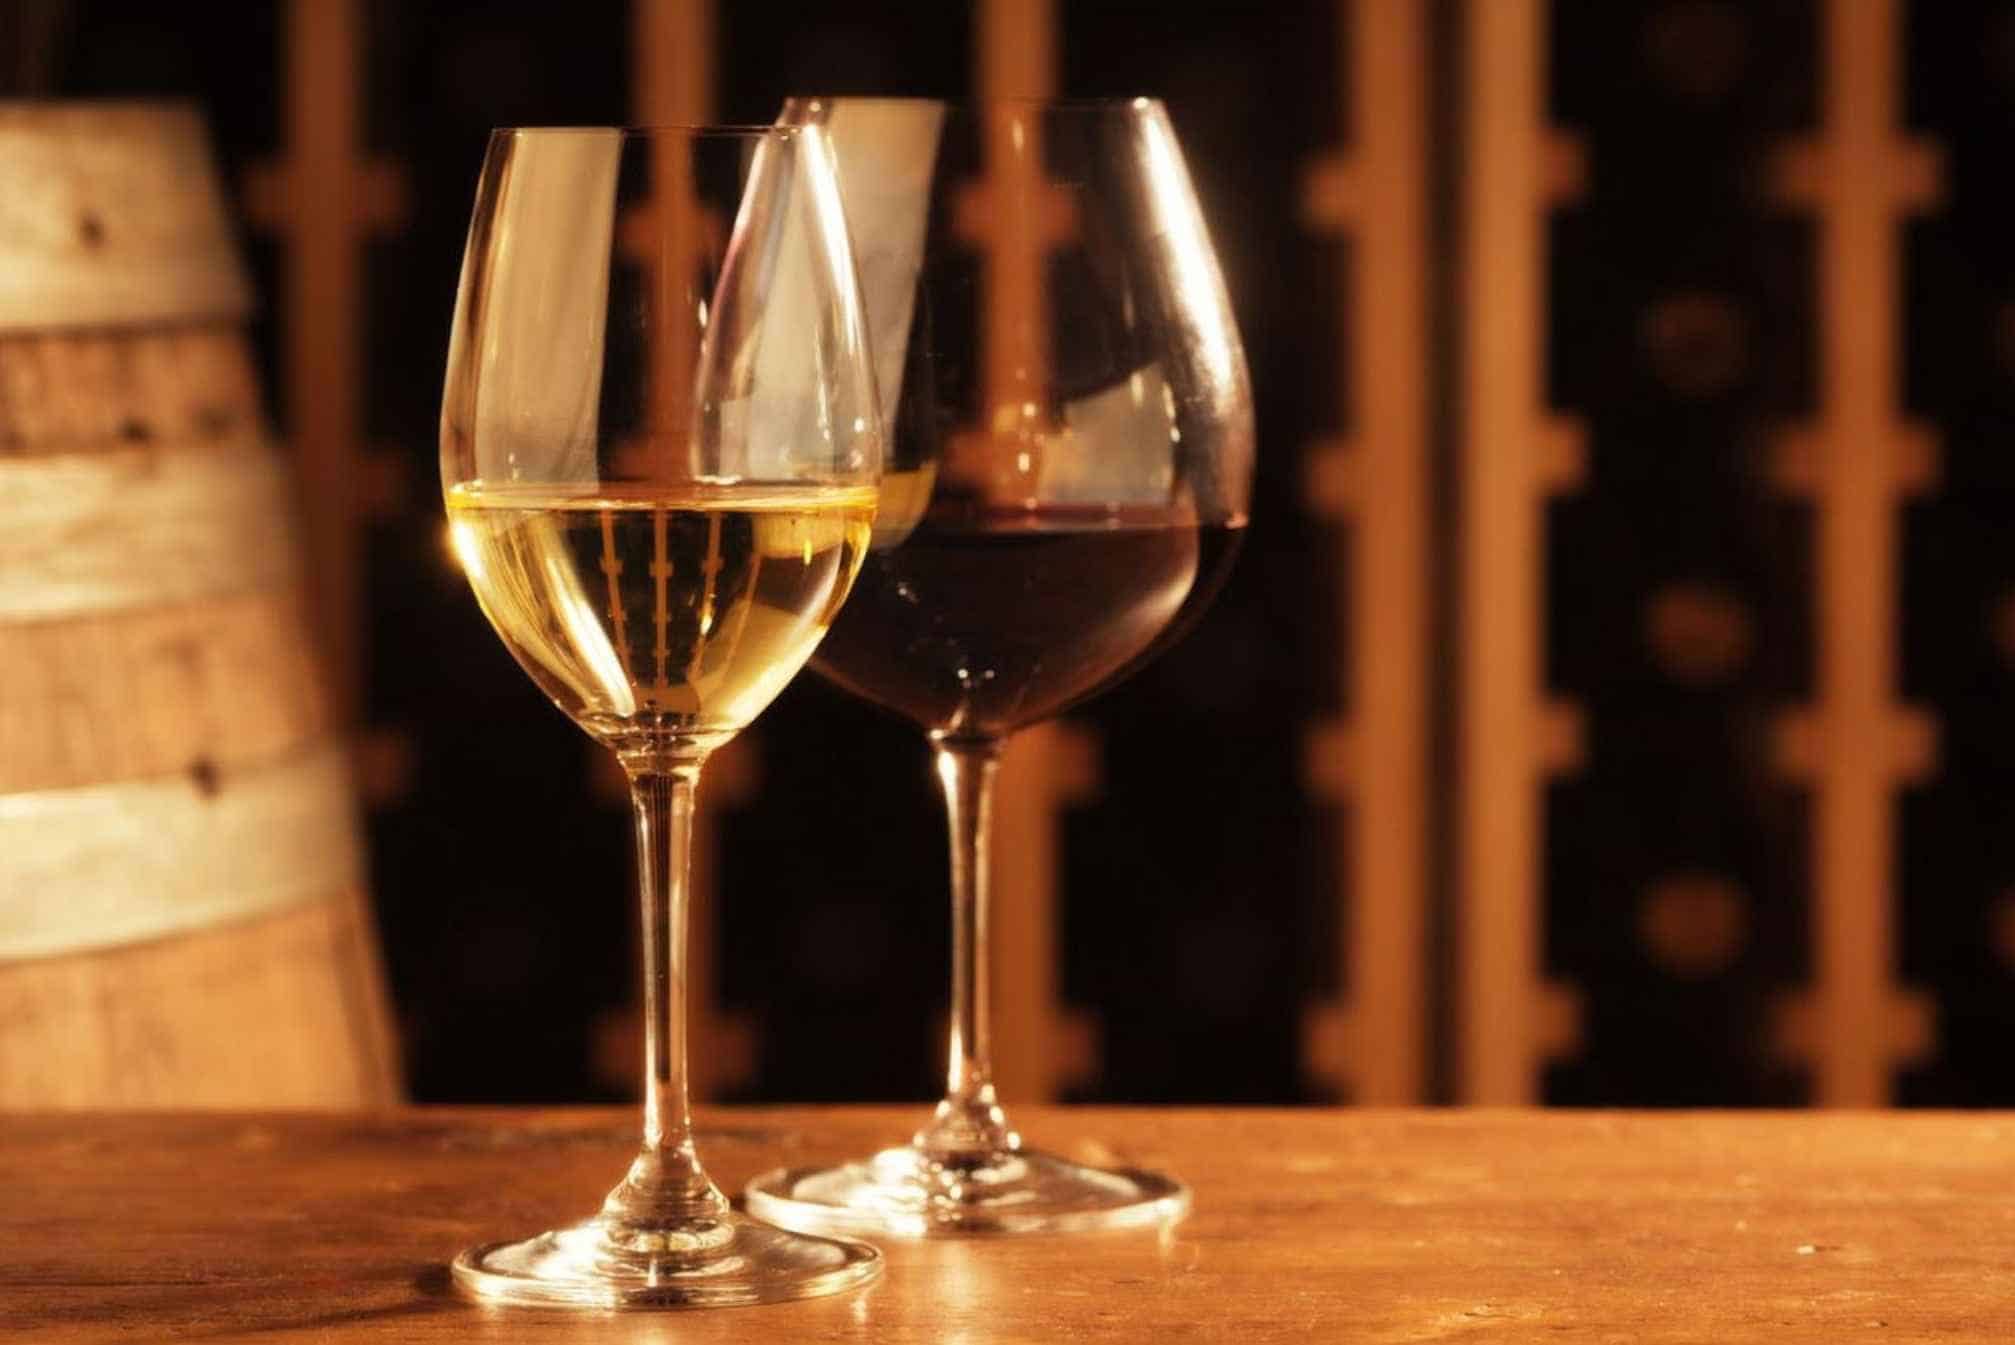 What are the differences between making red and white wine